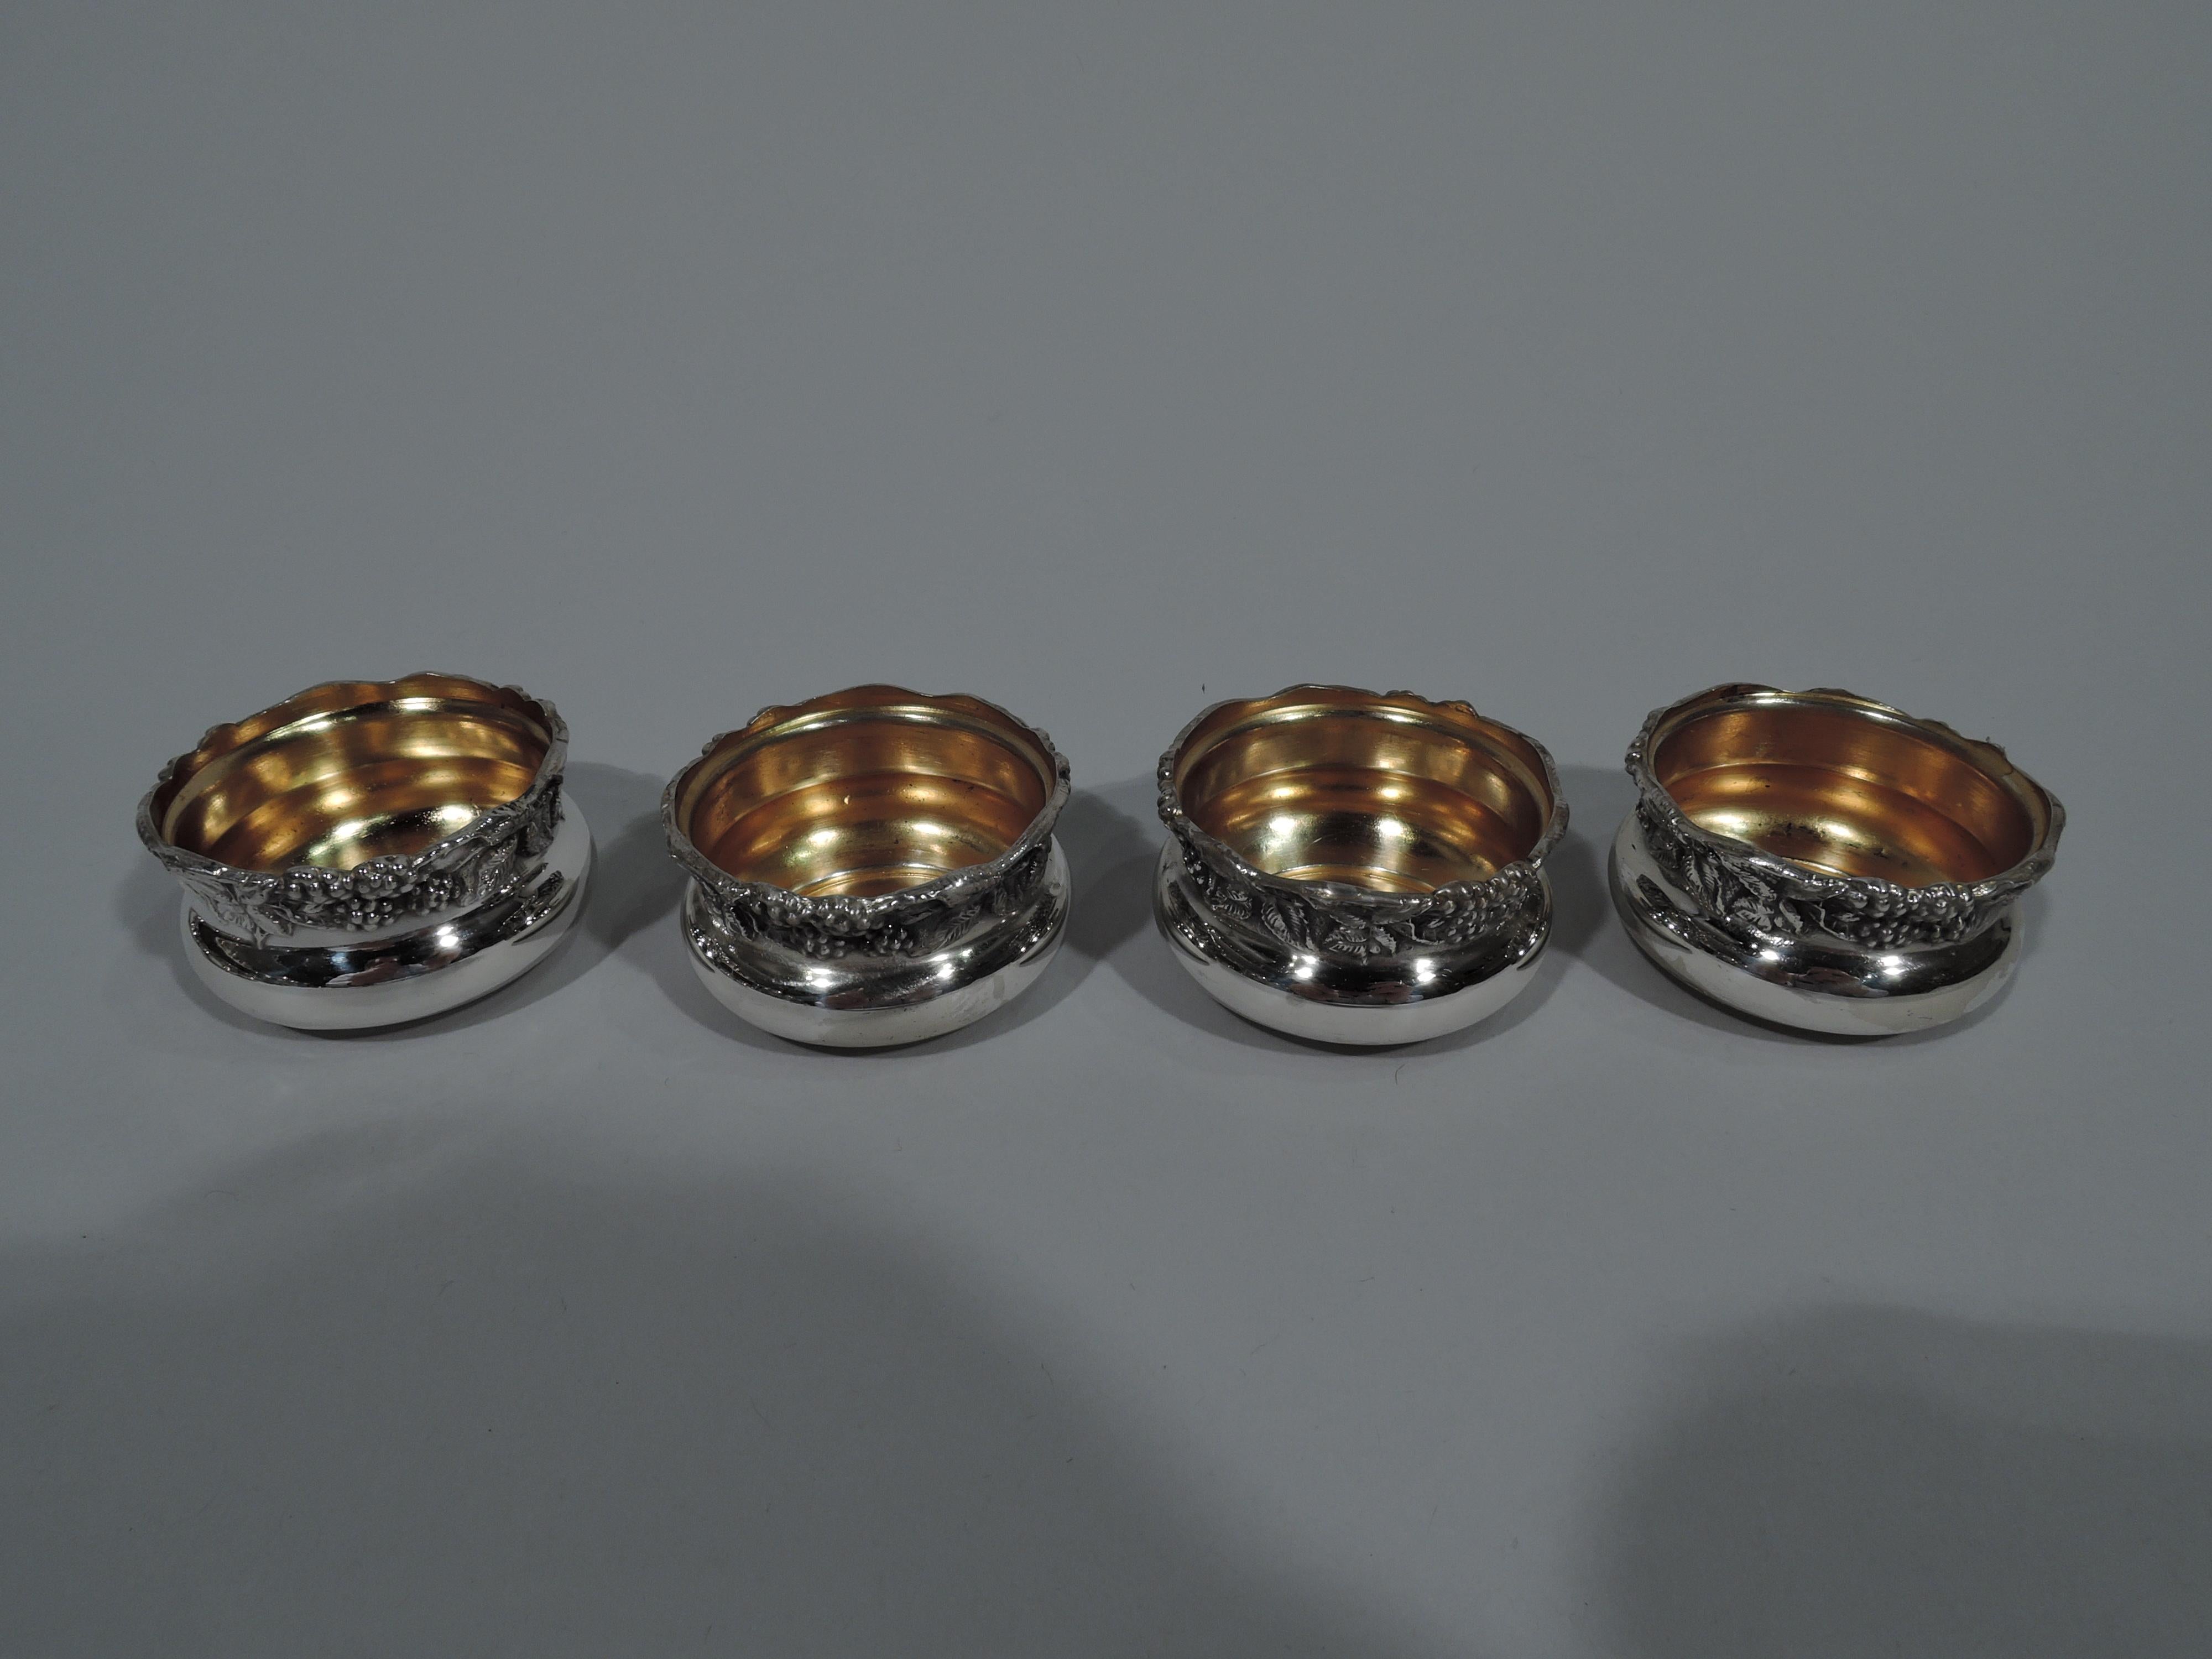 Set of 12 pretty Art Nouveau sterling silver open salts. Made by Webster in N. Attleboro, Mass., circa 1900. Each: Bellied bowl on inset foot ring. Rim has tooled leaves and berry bunches. Interior gilt. Hallmarked. Total weight: 5.3 troy ounces.